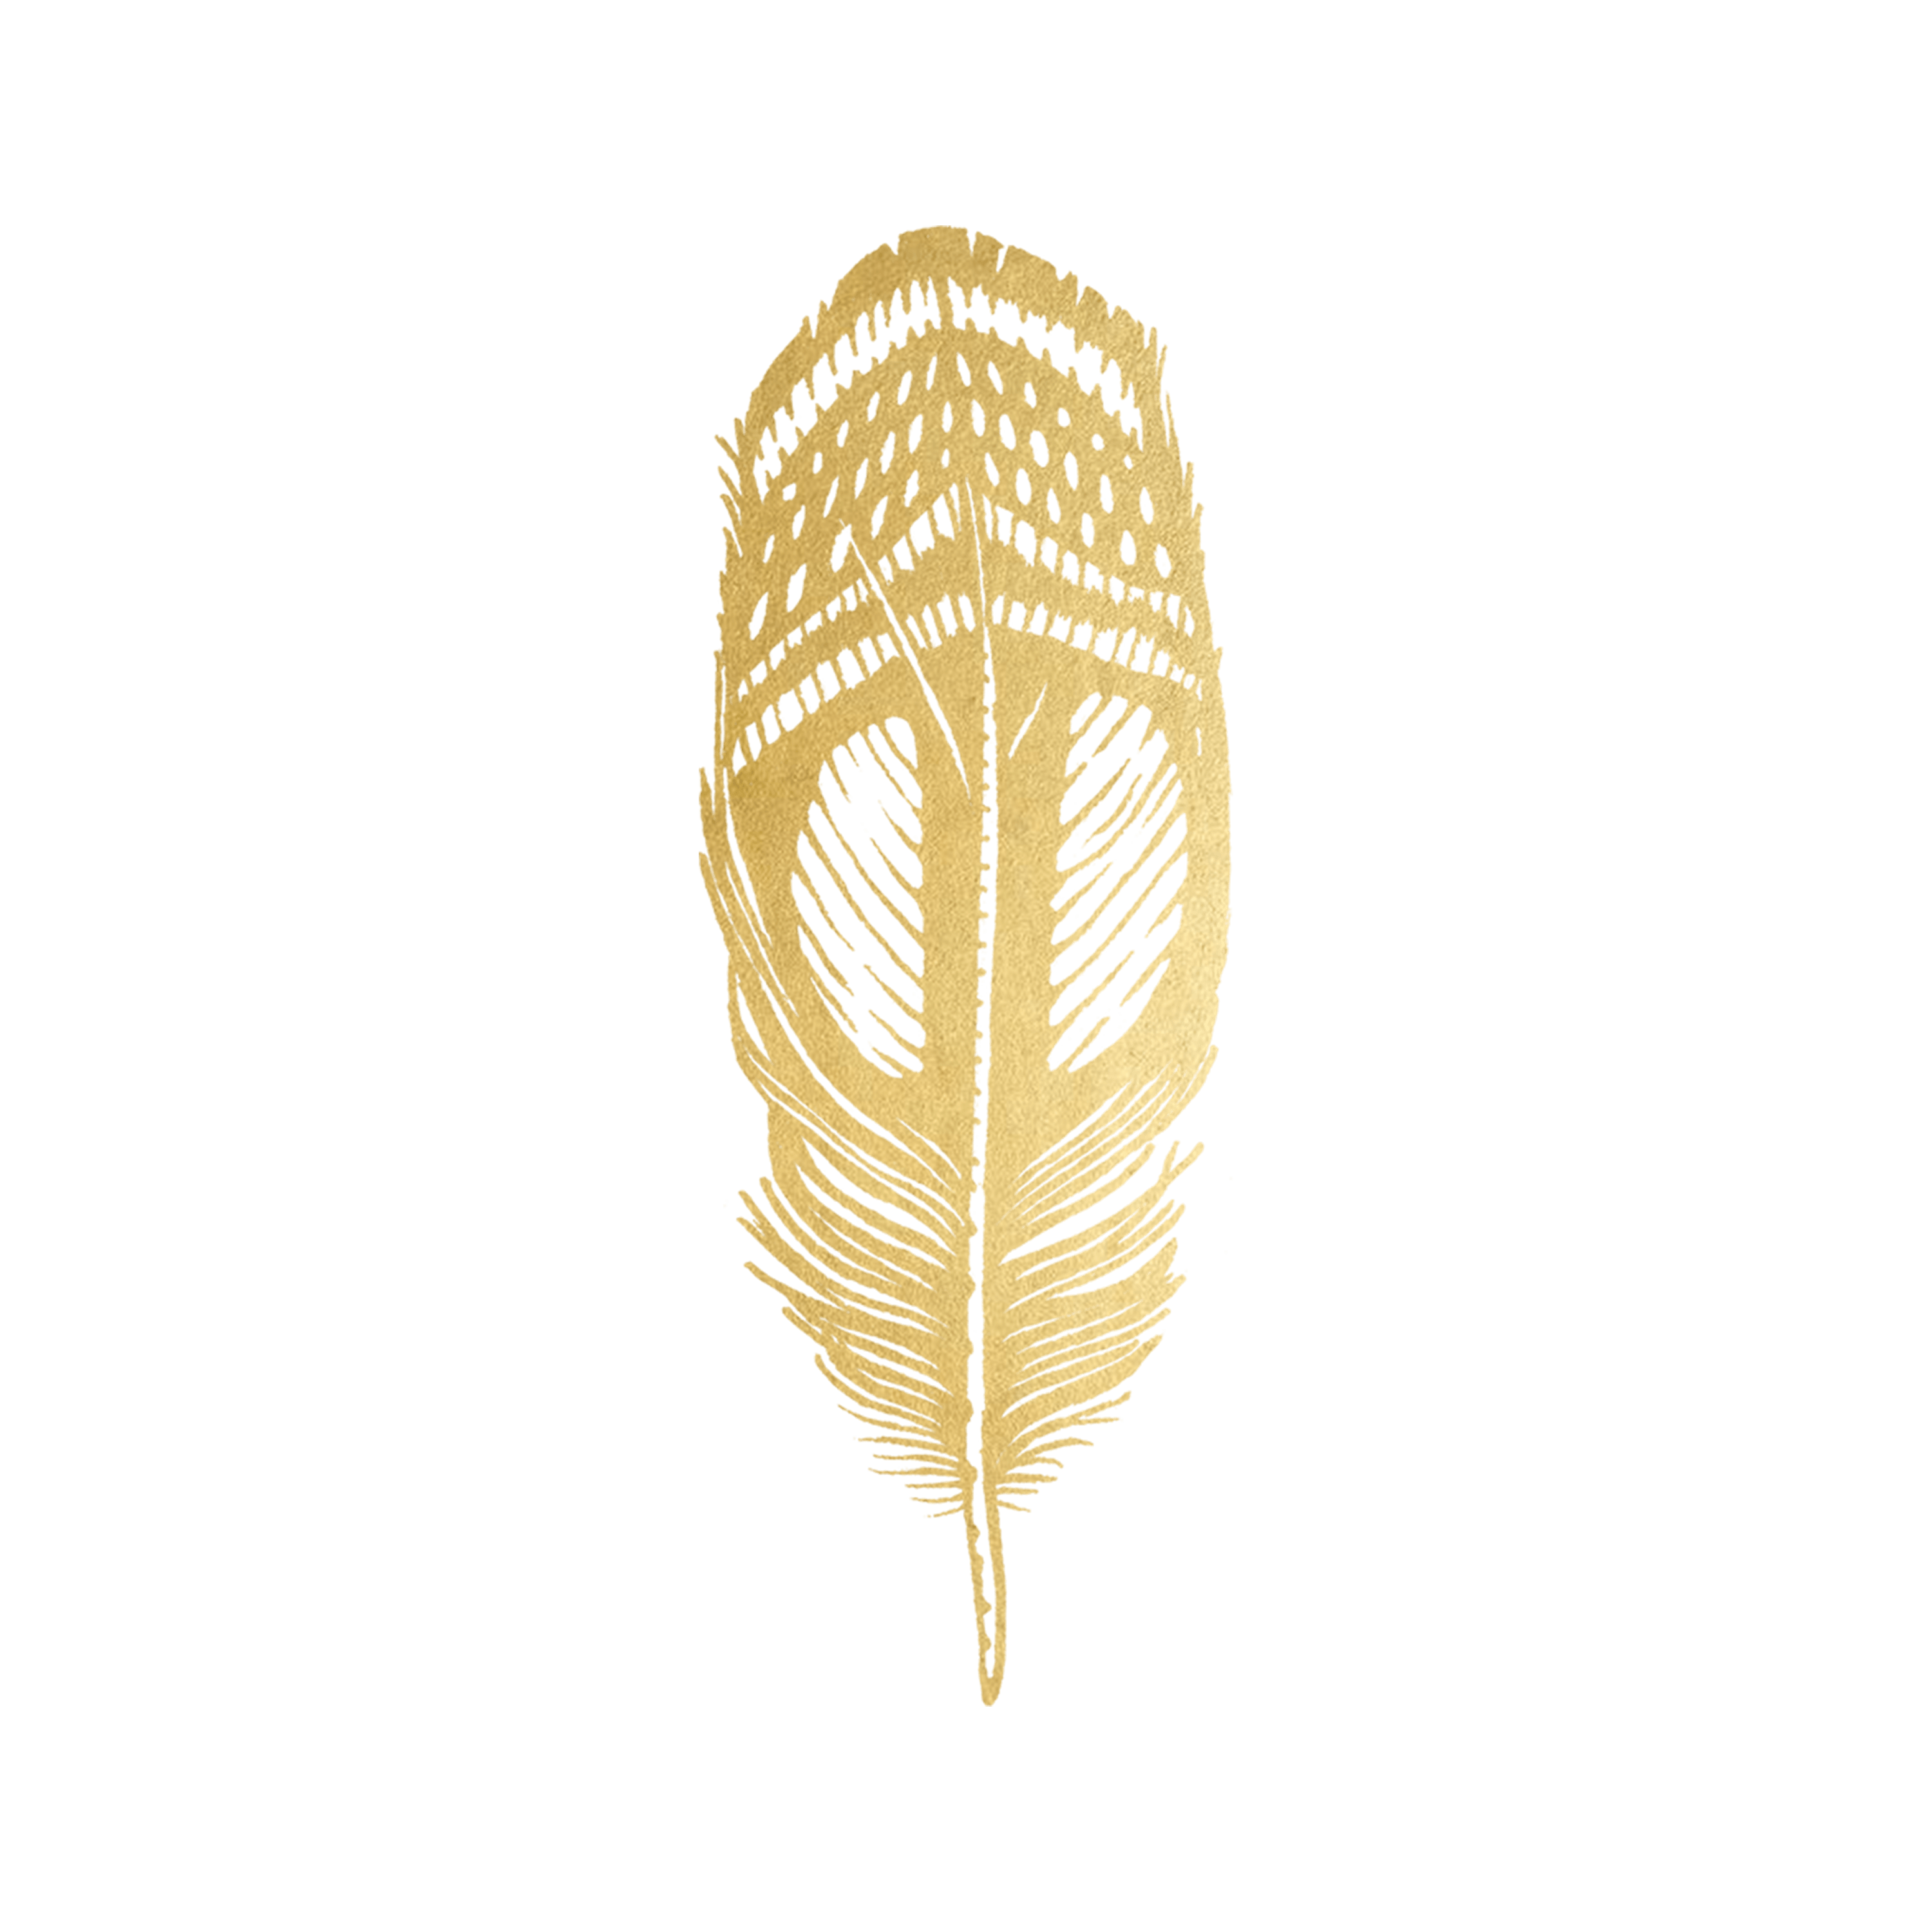 Gold Feather Logo - Quail Feather (Gold) by Jen Mussari from Tattly Temporary Tattoos